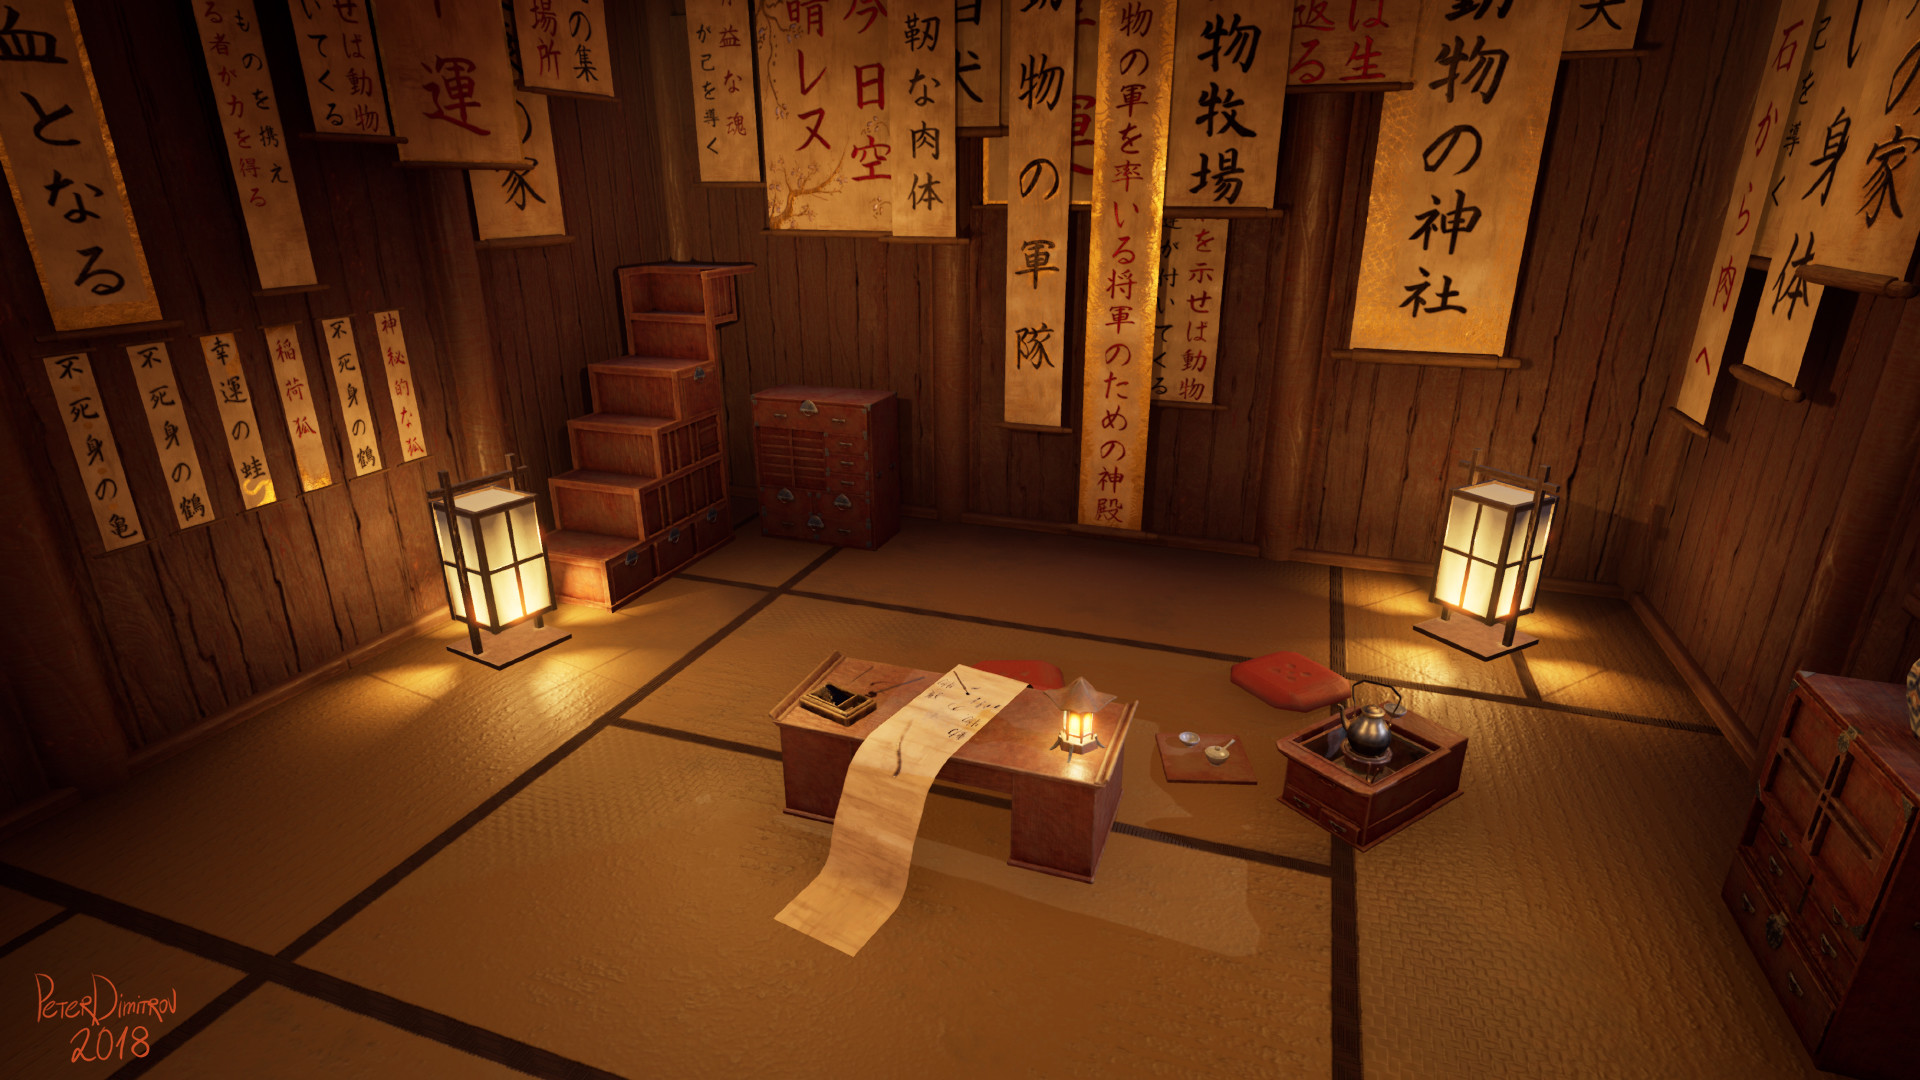 The interior of the calligraphers hut. In the middle is the tiny writing desk with pens and scroll on top. In the corners are lots of furniture. On the walls are many Japanese fortune scrolls.